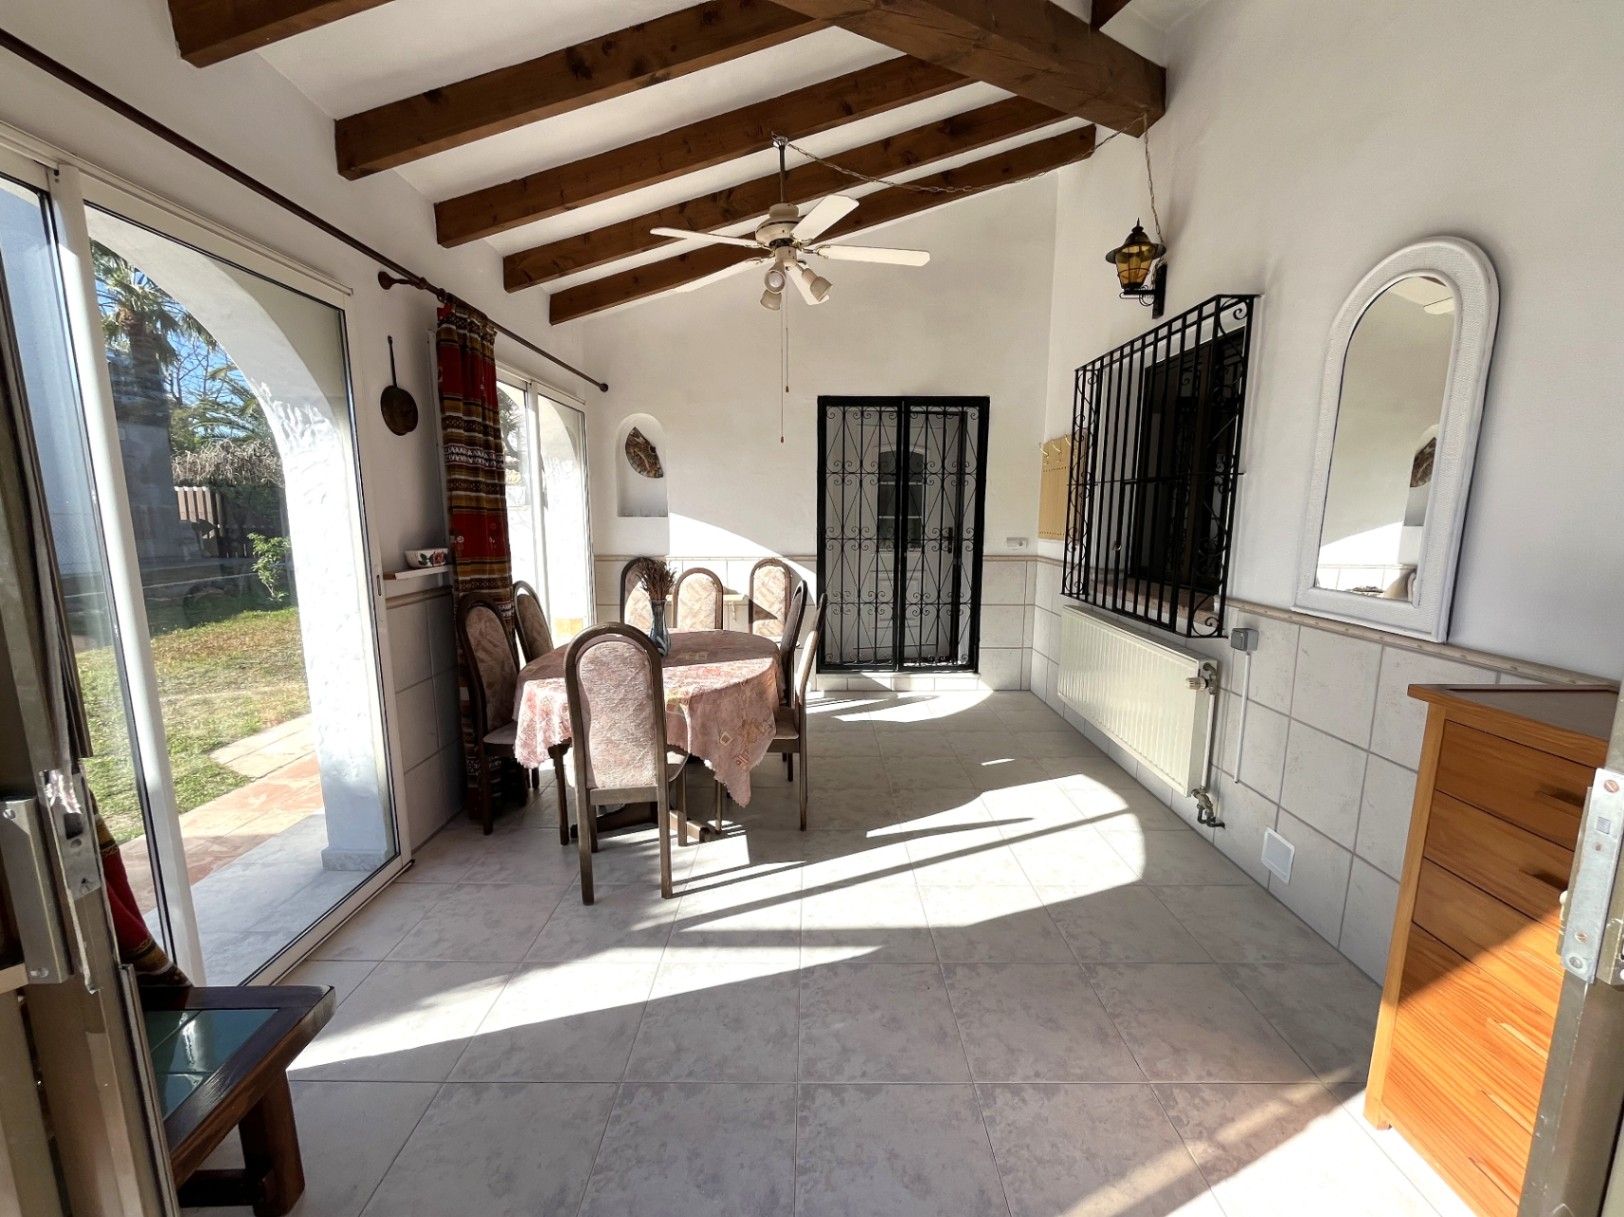 Villa with pool for sale in Els Poblets